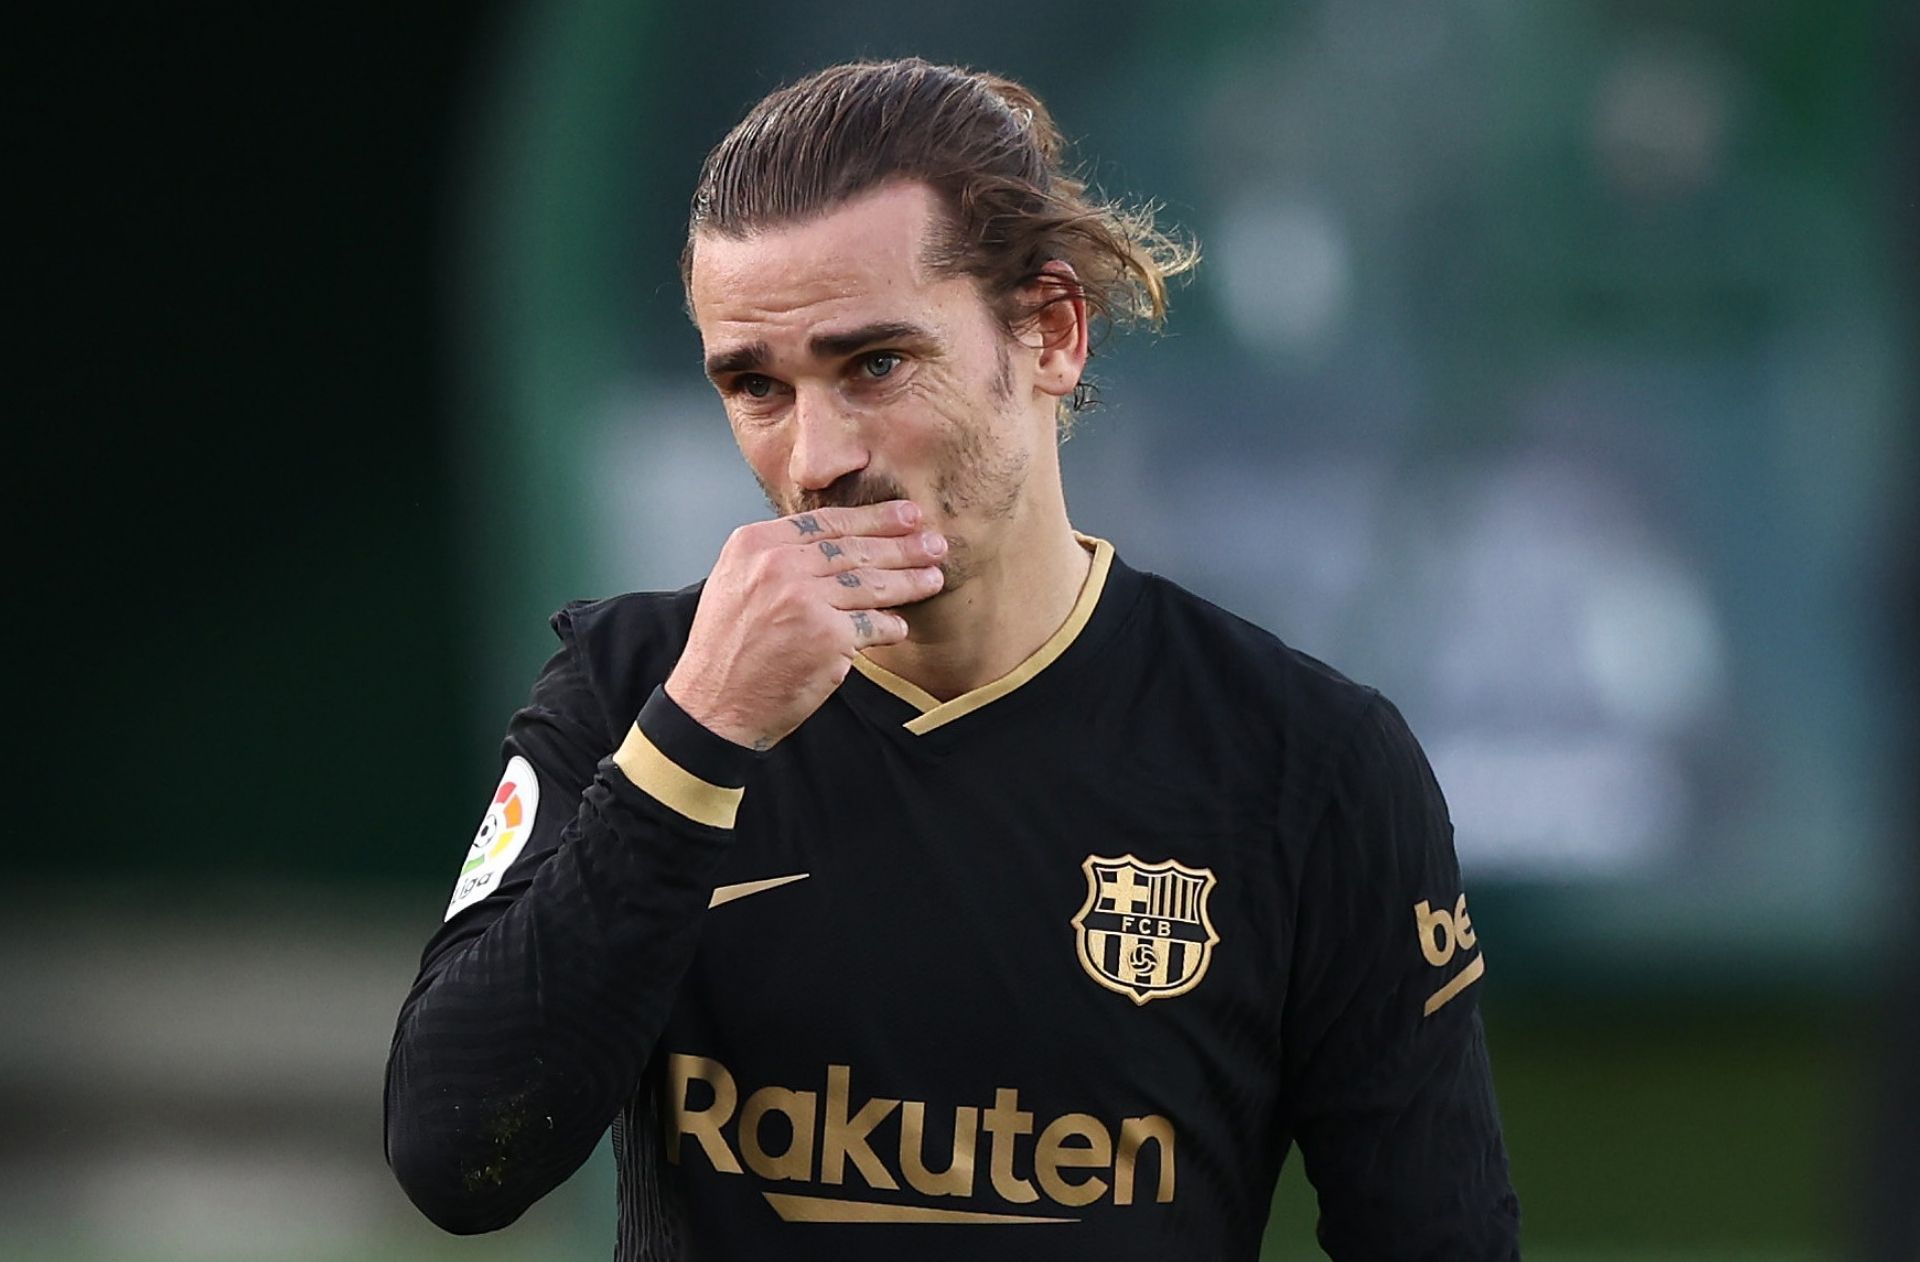 Griezmann Told He Made A Mistake By Moving To Barcelona